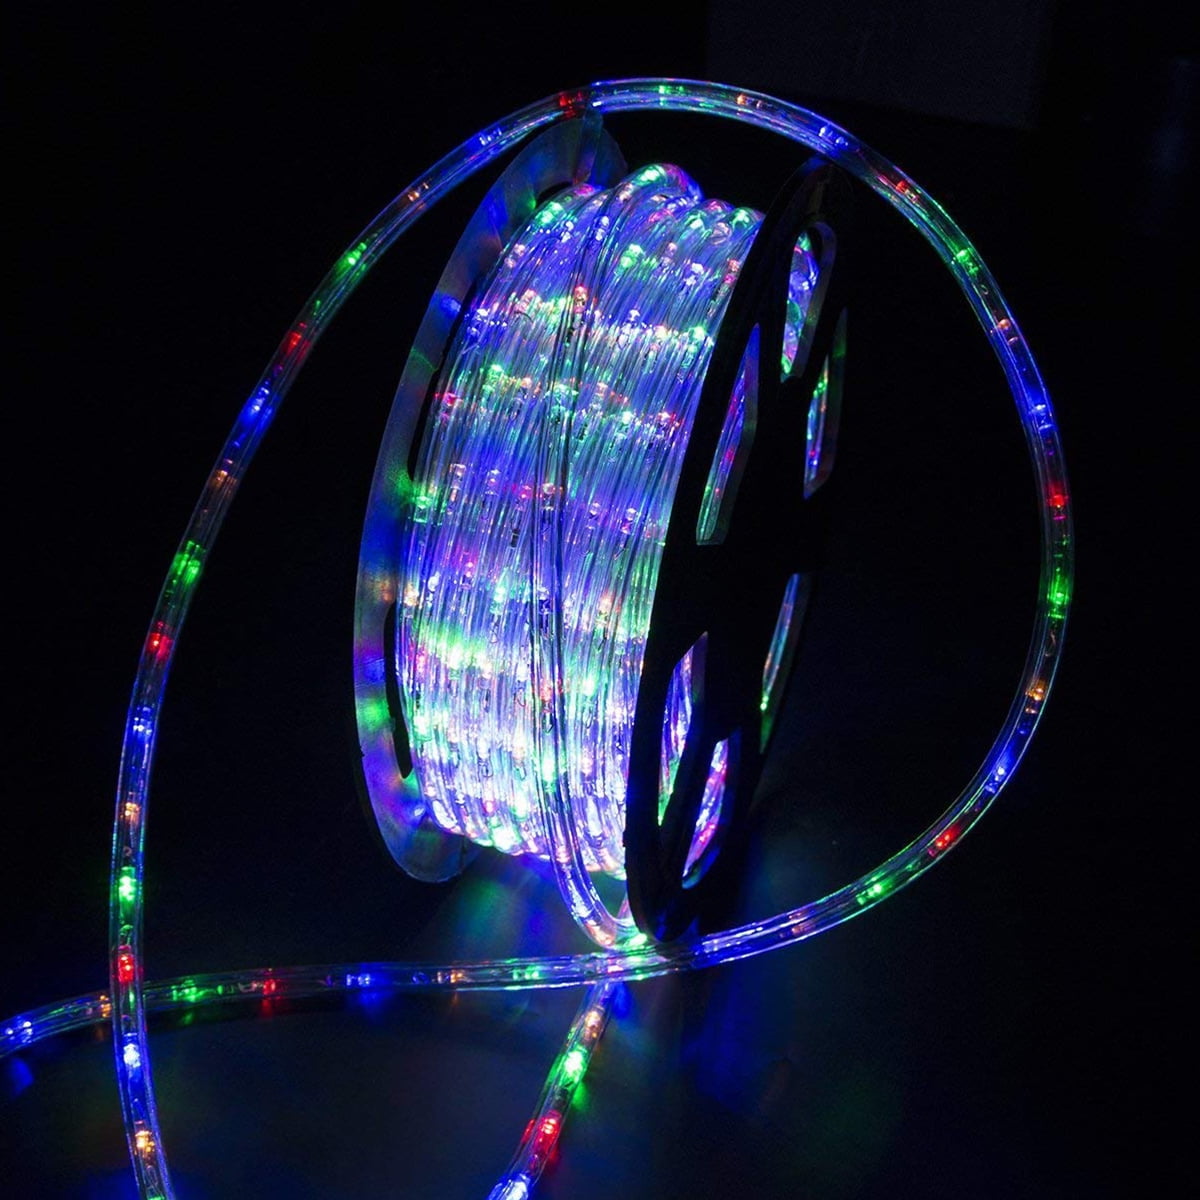 100FT LED Rope Lights Home Party Christmas Decorative In/Outdoor XMAS Festival 